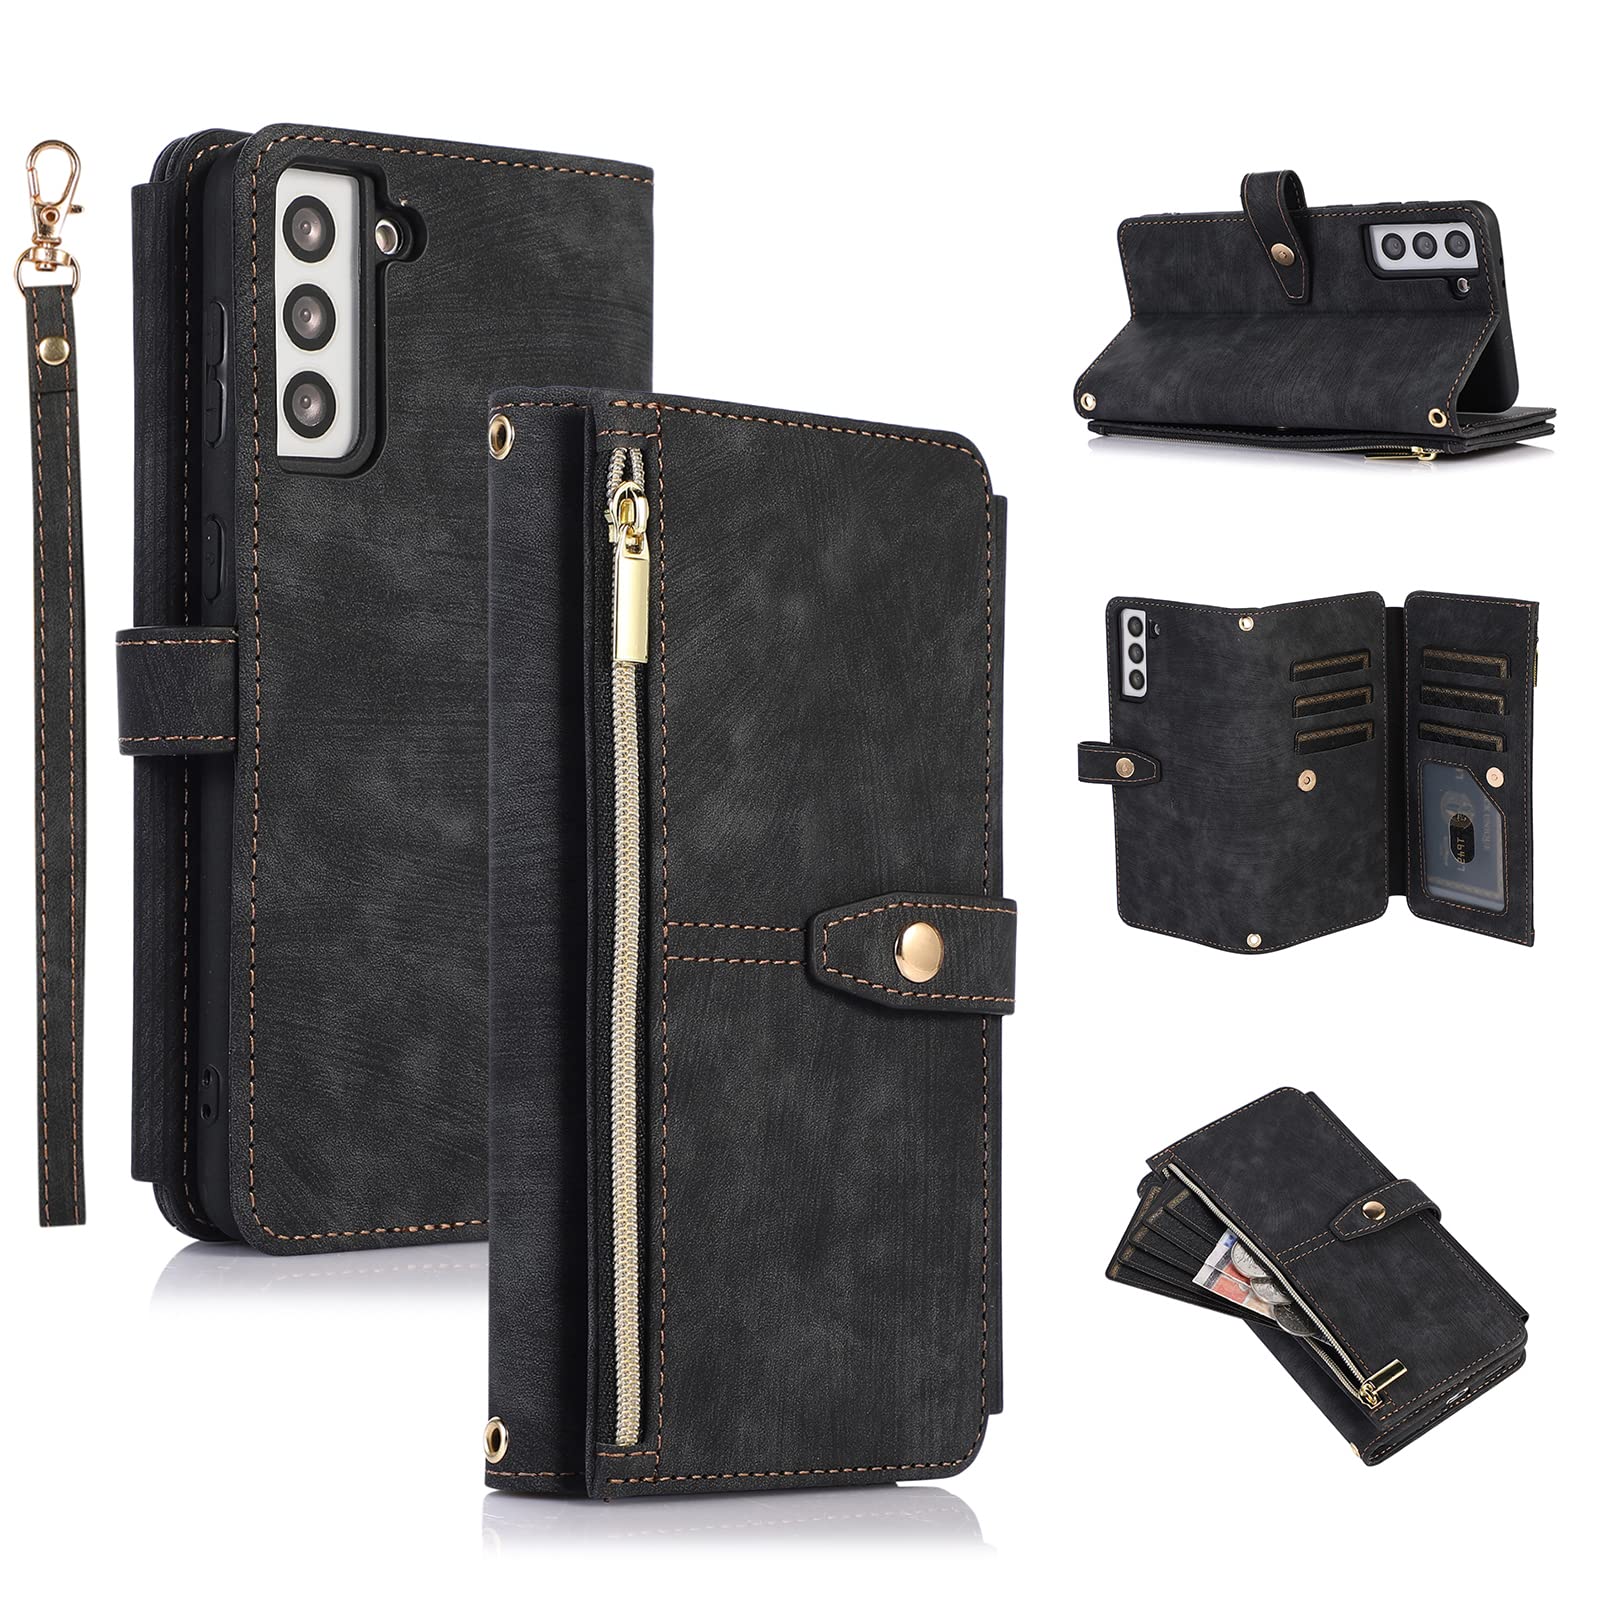 Ueebai Case For Samsung Galaxy S21 Fe 5G, 9 Card Slots Retro Leather Wallet Shockproof Flip Cover With Hand Strap Card Slots Zip